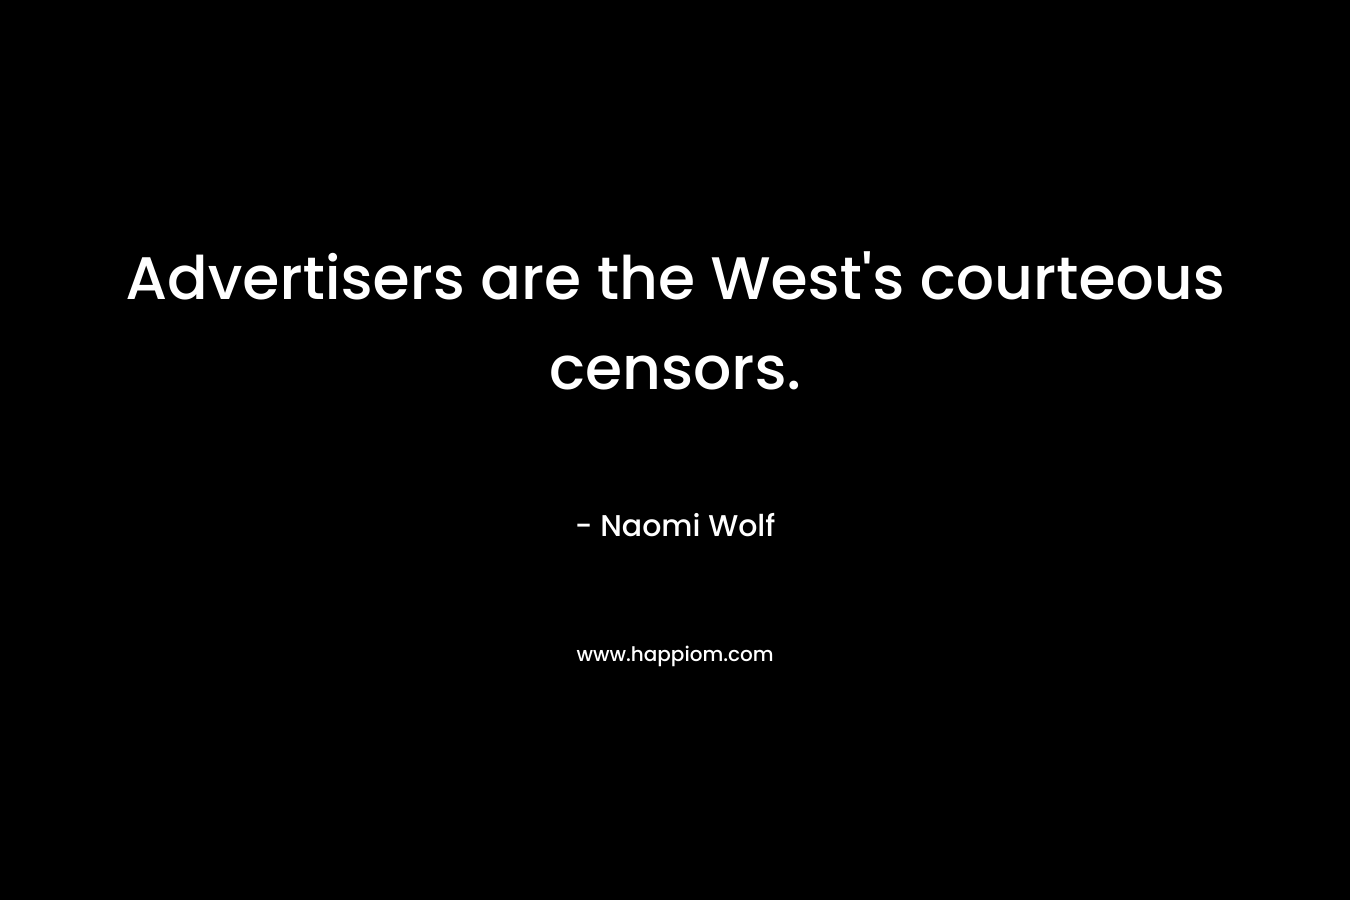 Advertisers are the West's courteous censors.